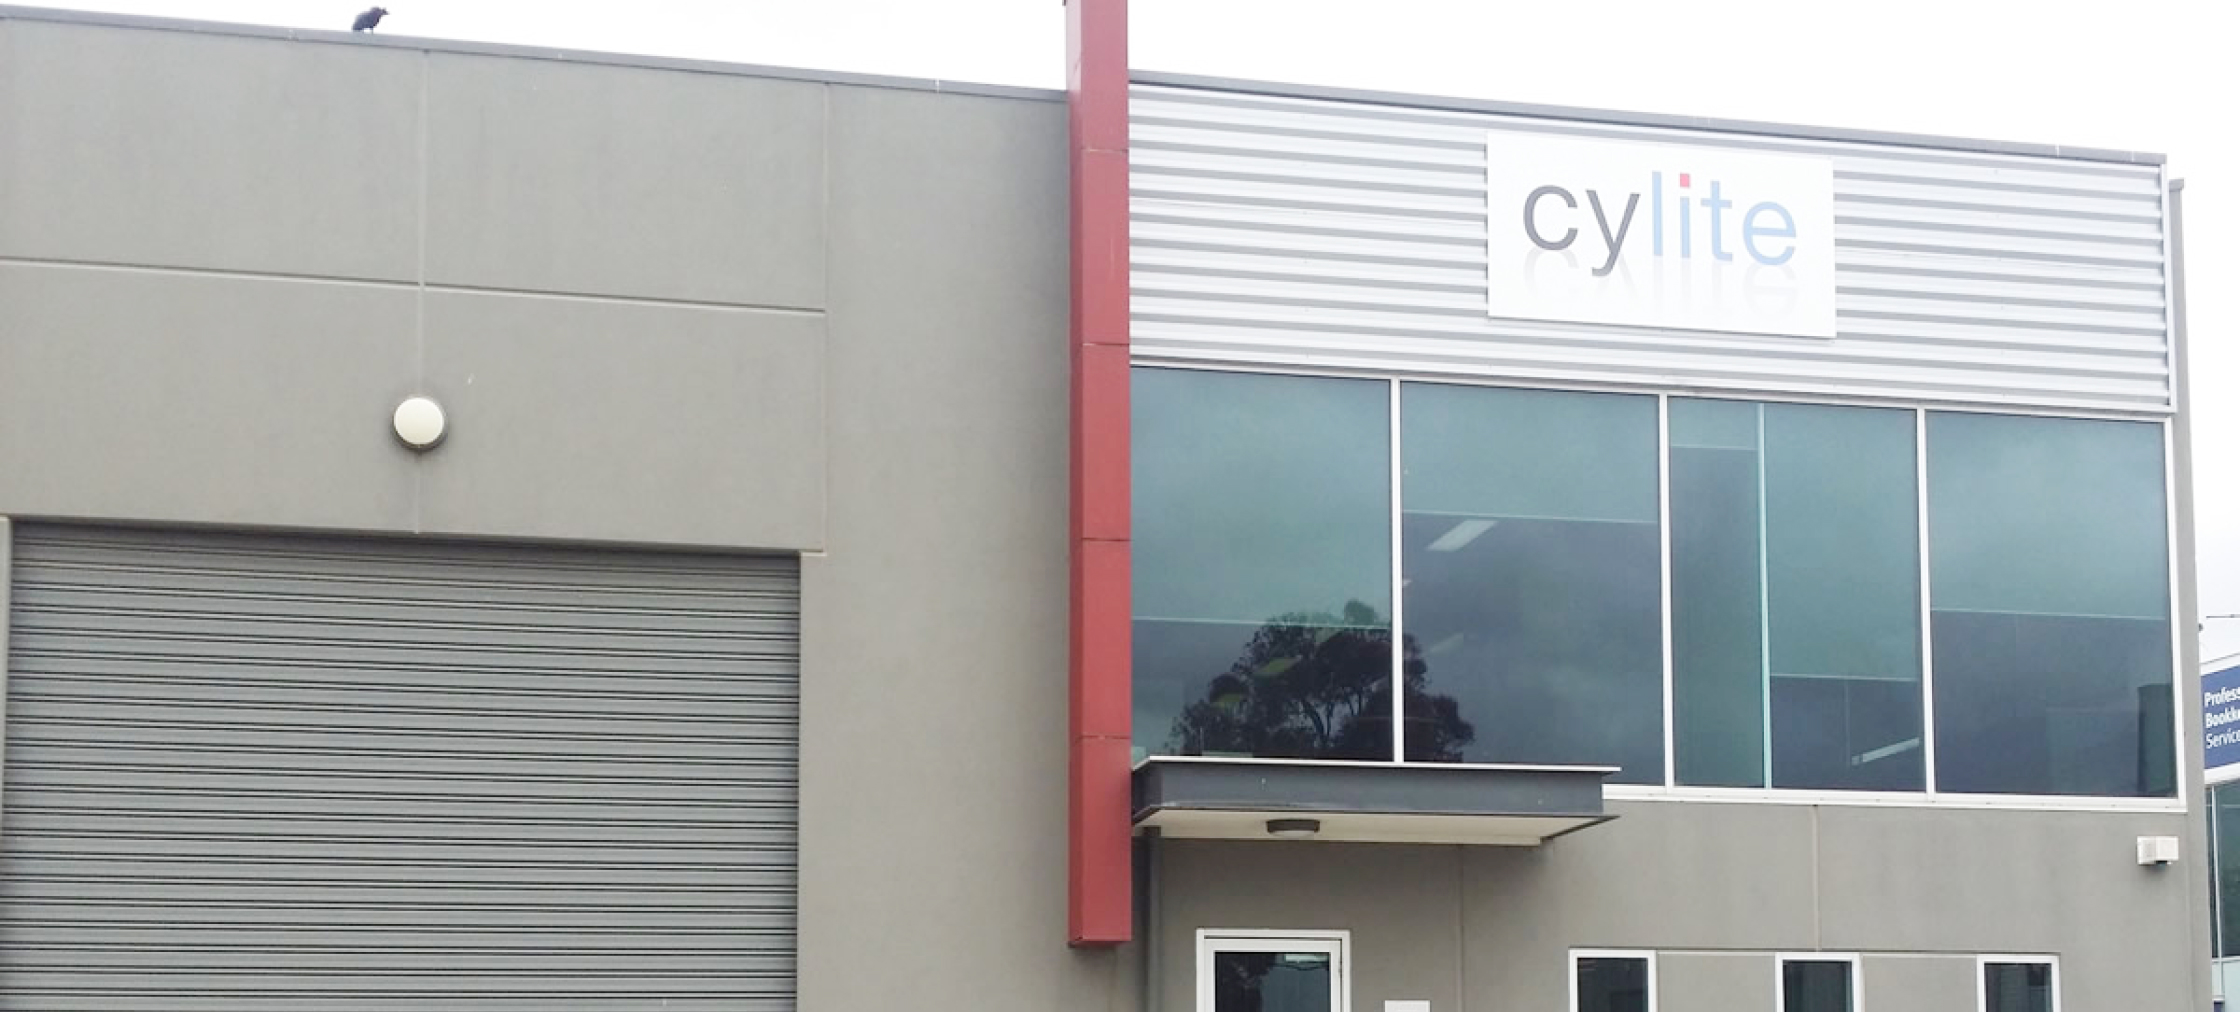 A photo of the building where Cylite office was